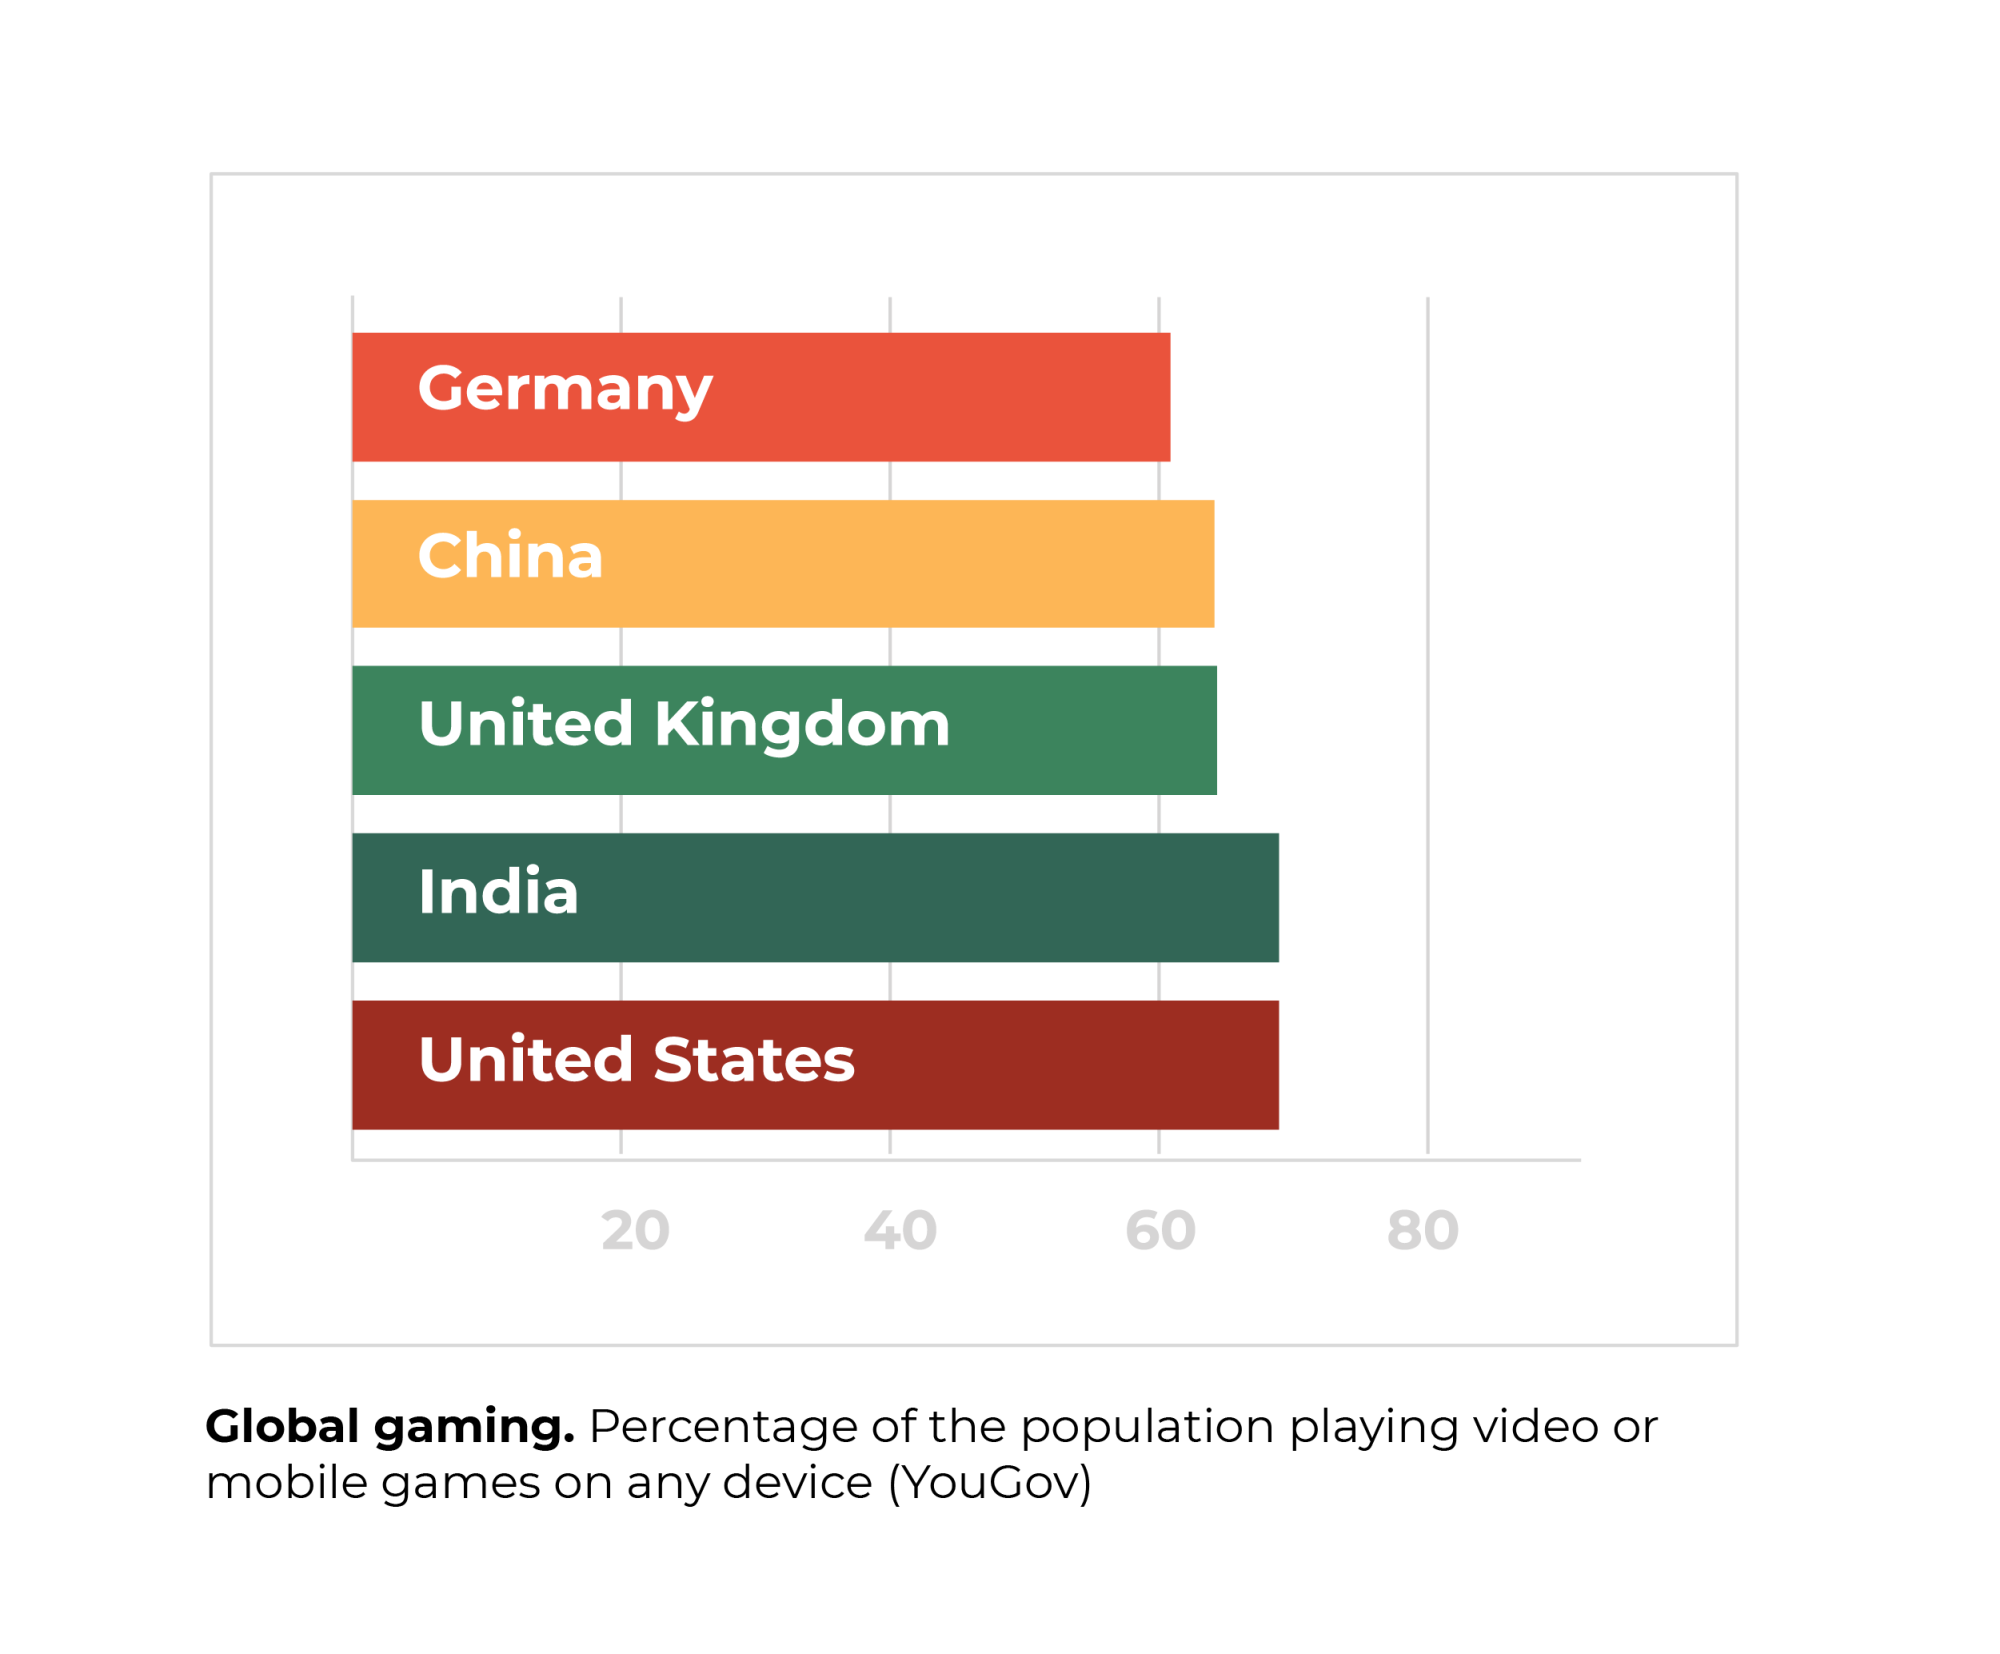 Graph showing percentage of the population of Germany, China, United Kingdom, India and United States who are playing video or mobile games